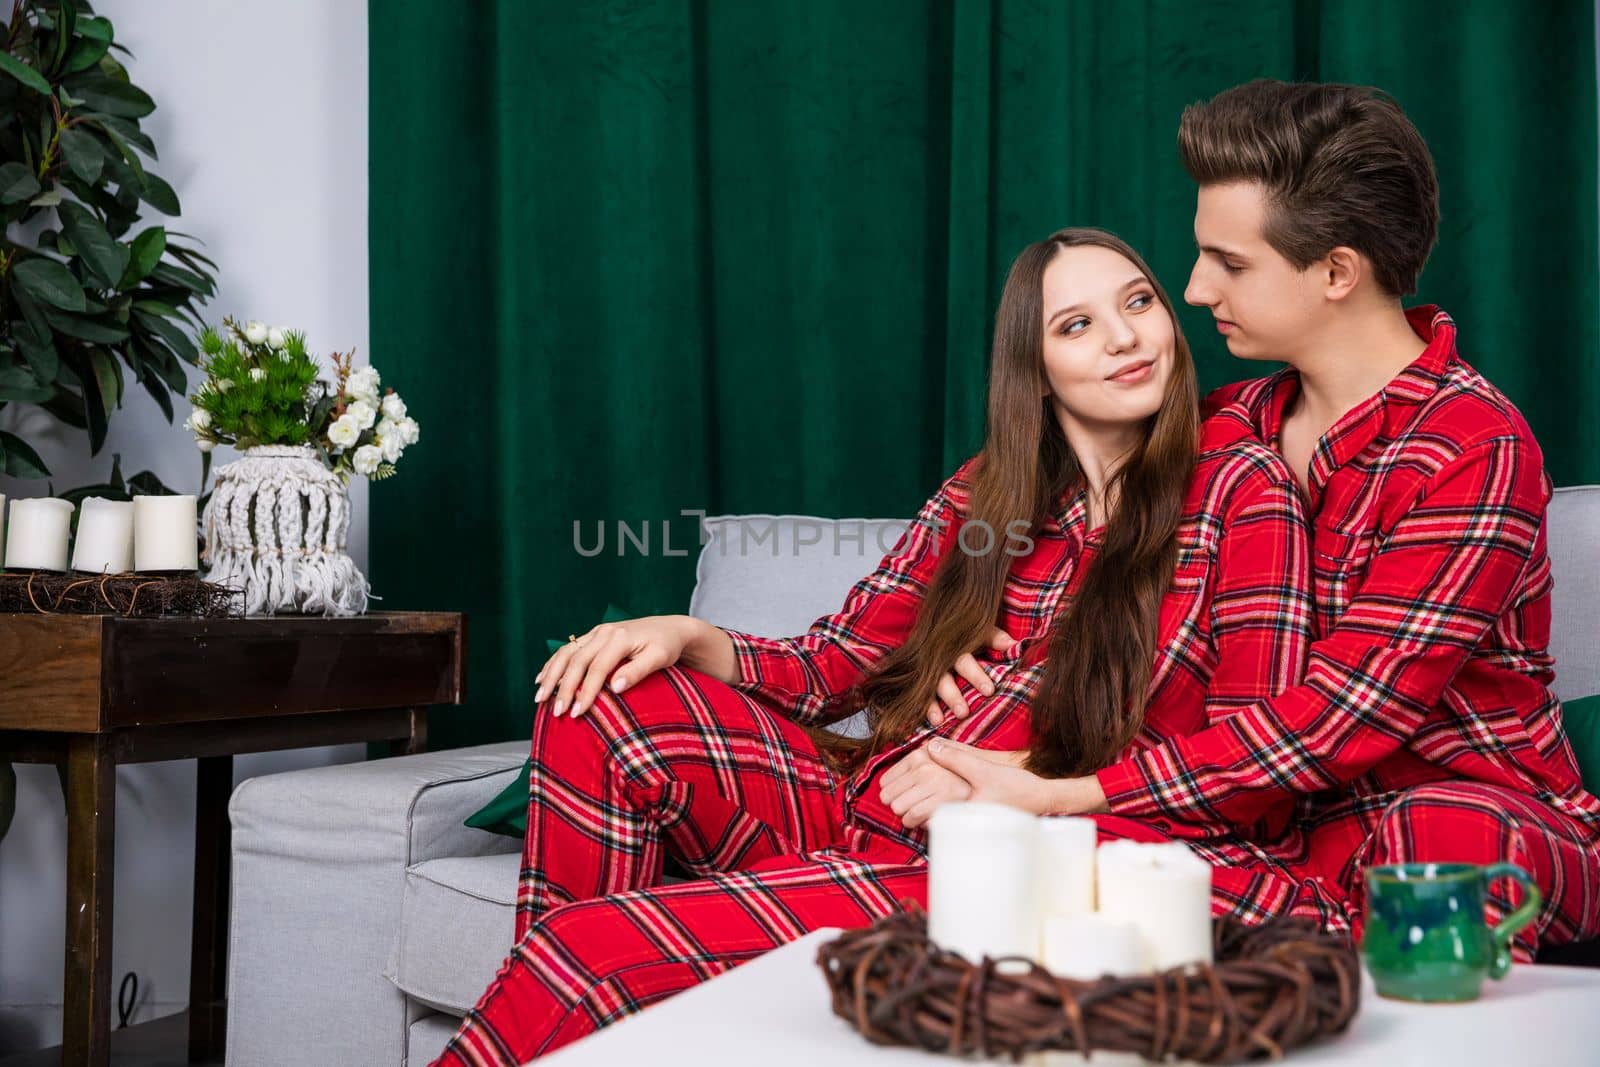 The couple in the photo shoot pose in identical red checkered pajamas. A heavy green curtain is seen in the background. The setting is romantic and in trendy colors of gray and green.